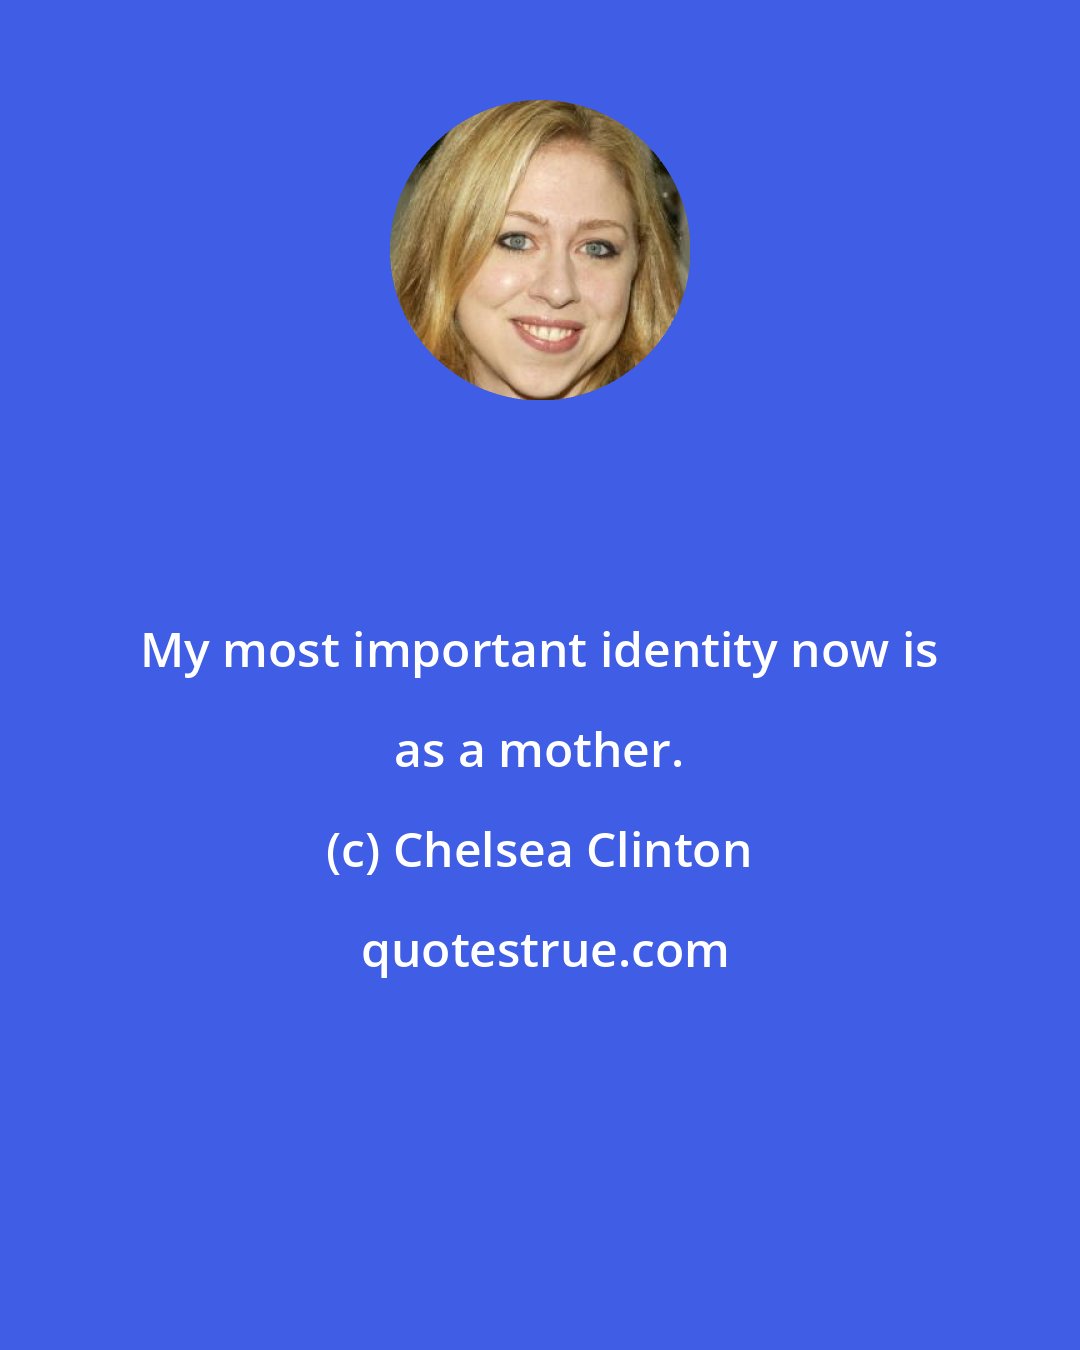 Chelsea Clinton: My most important identity now is as a mother.